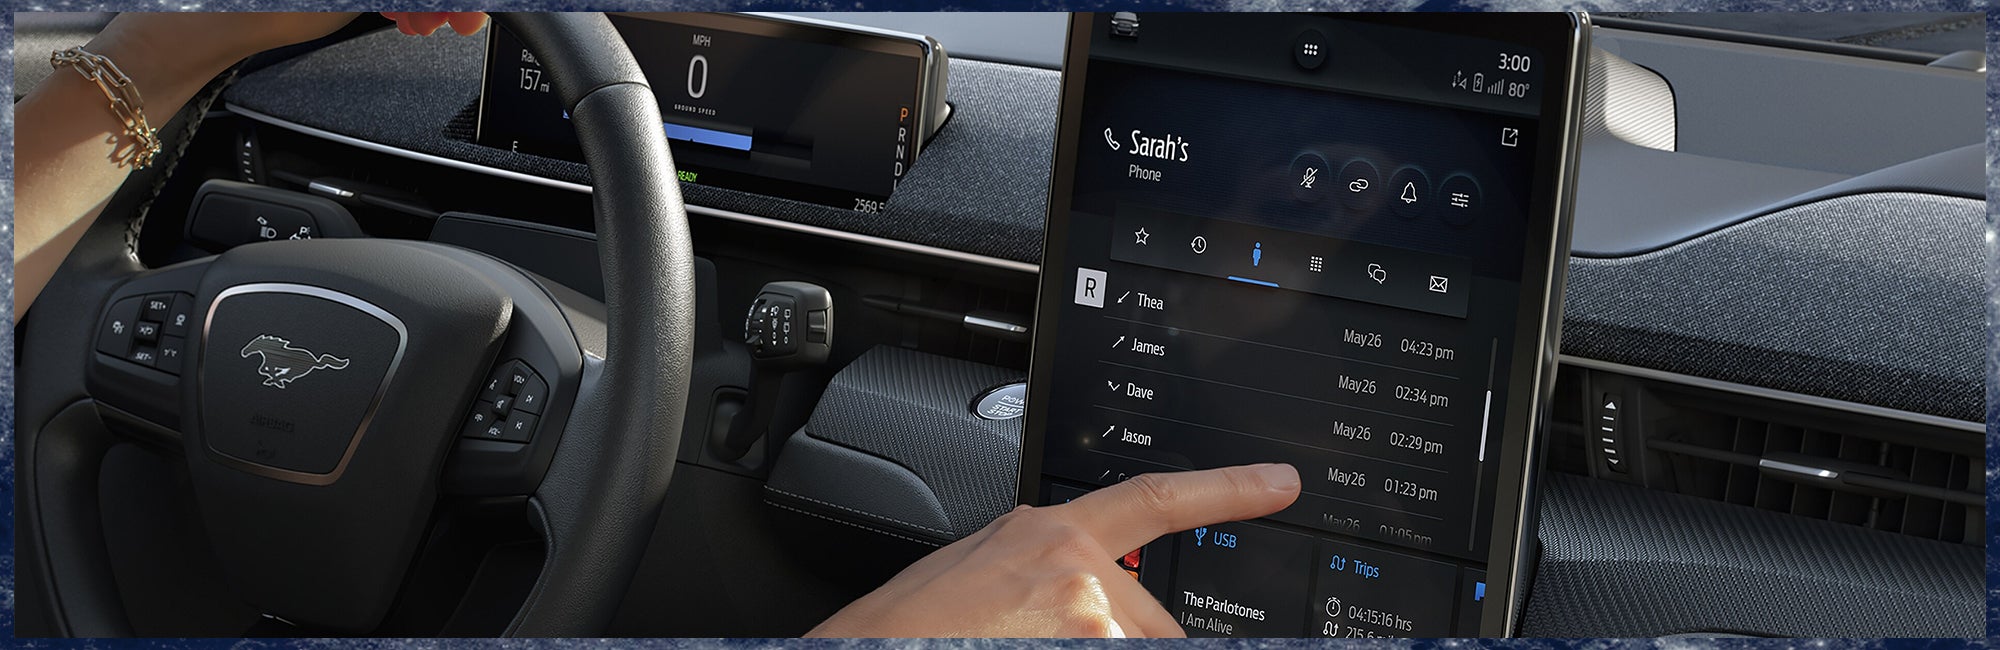 How to Update Ford SYNC